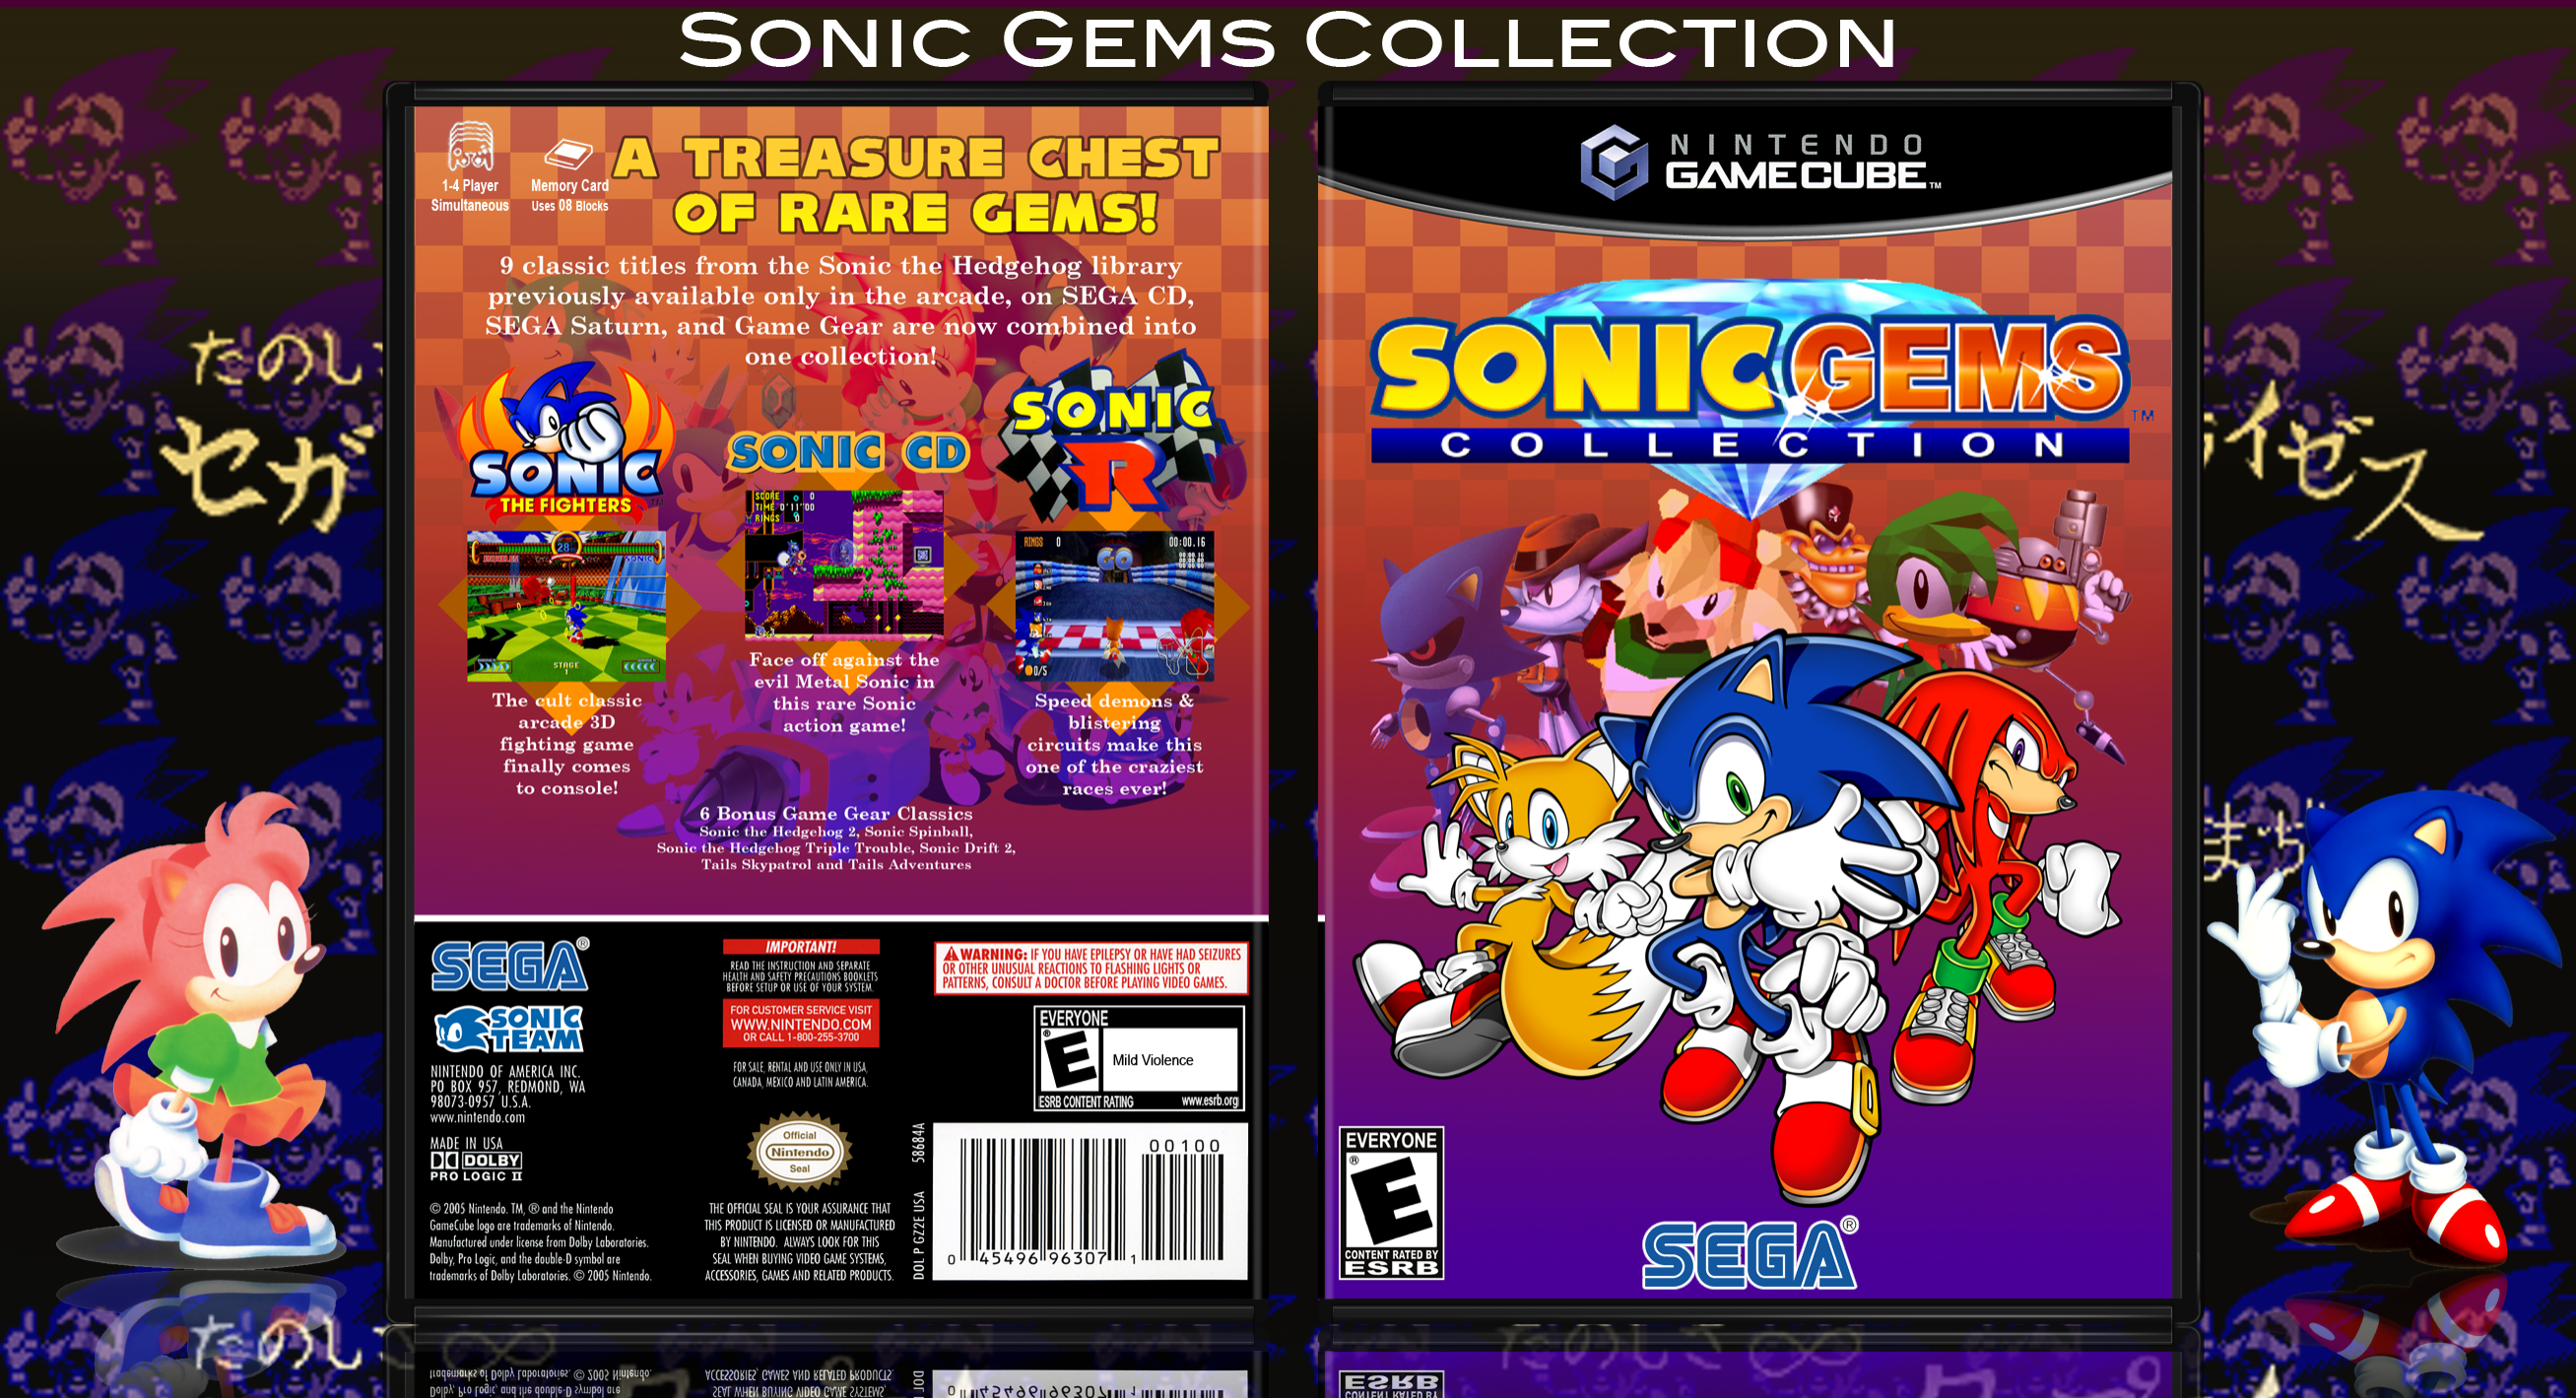 Sonic Gems Collection box cover